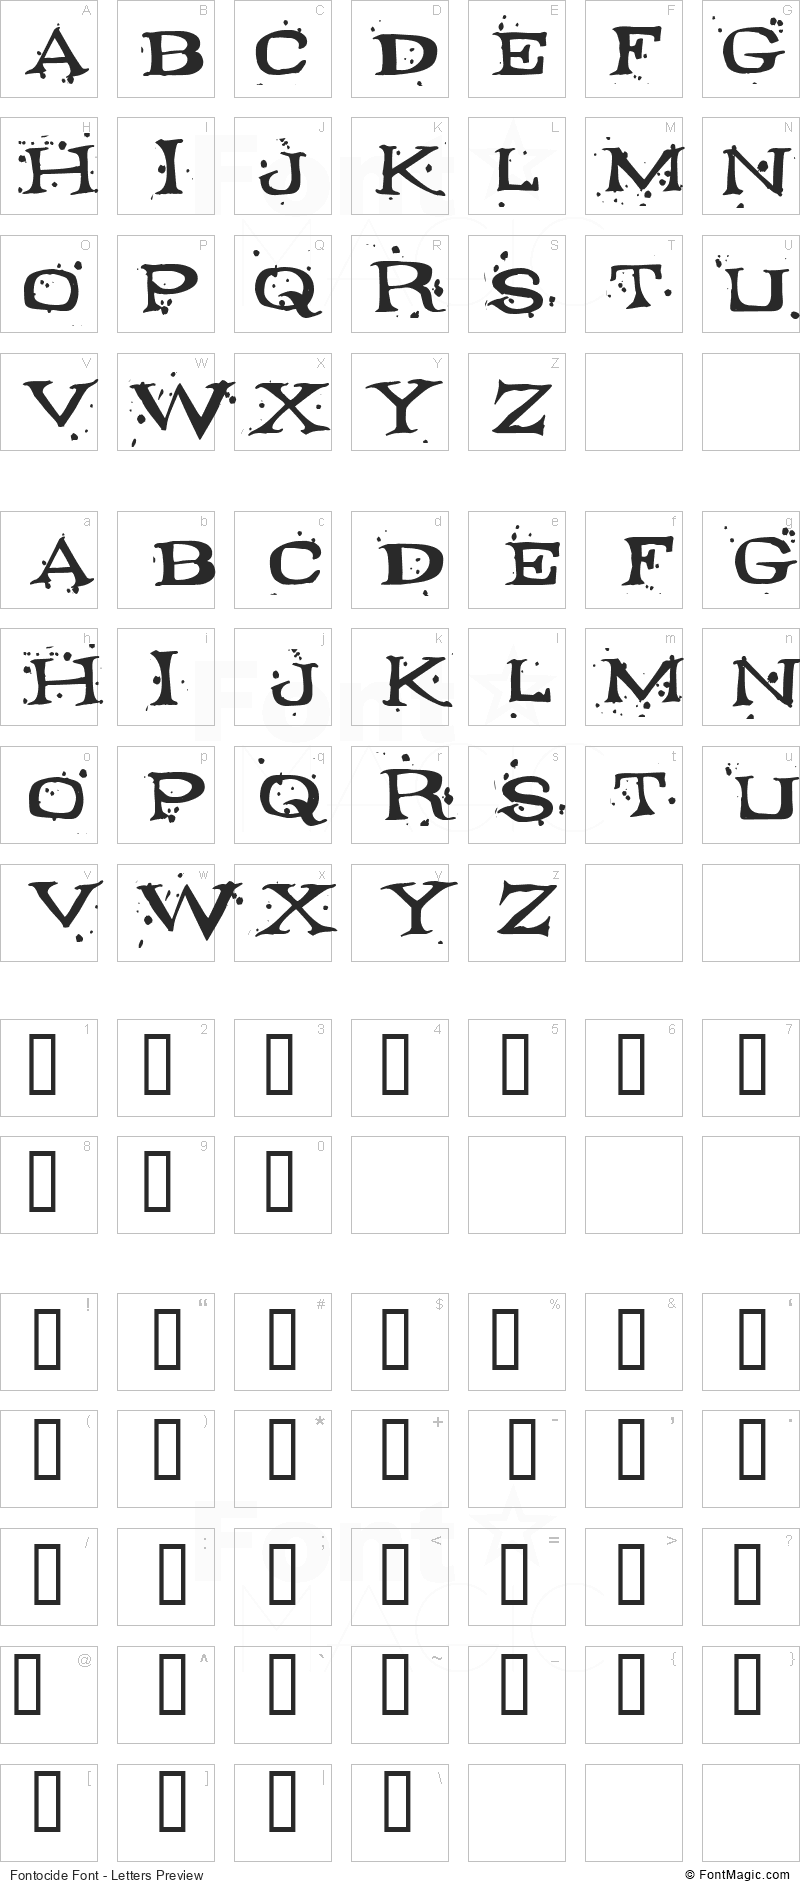 Fontocide Font - All Latters Preview Chart